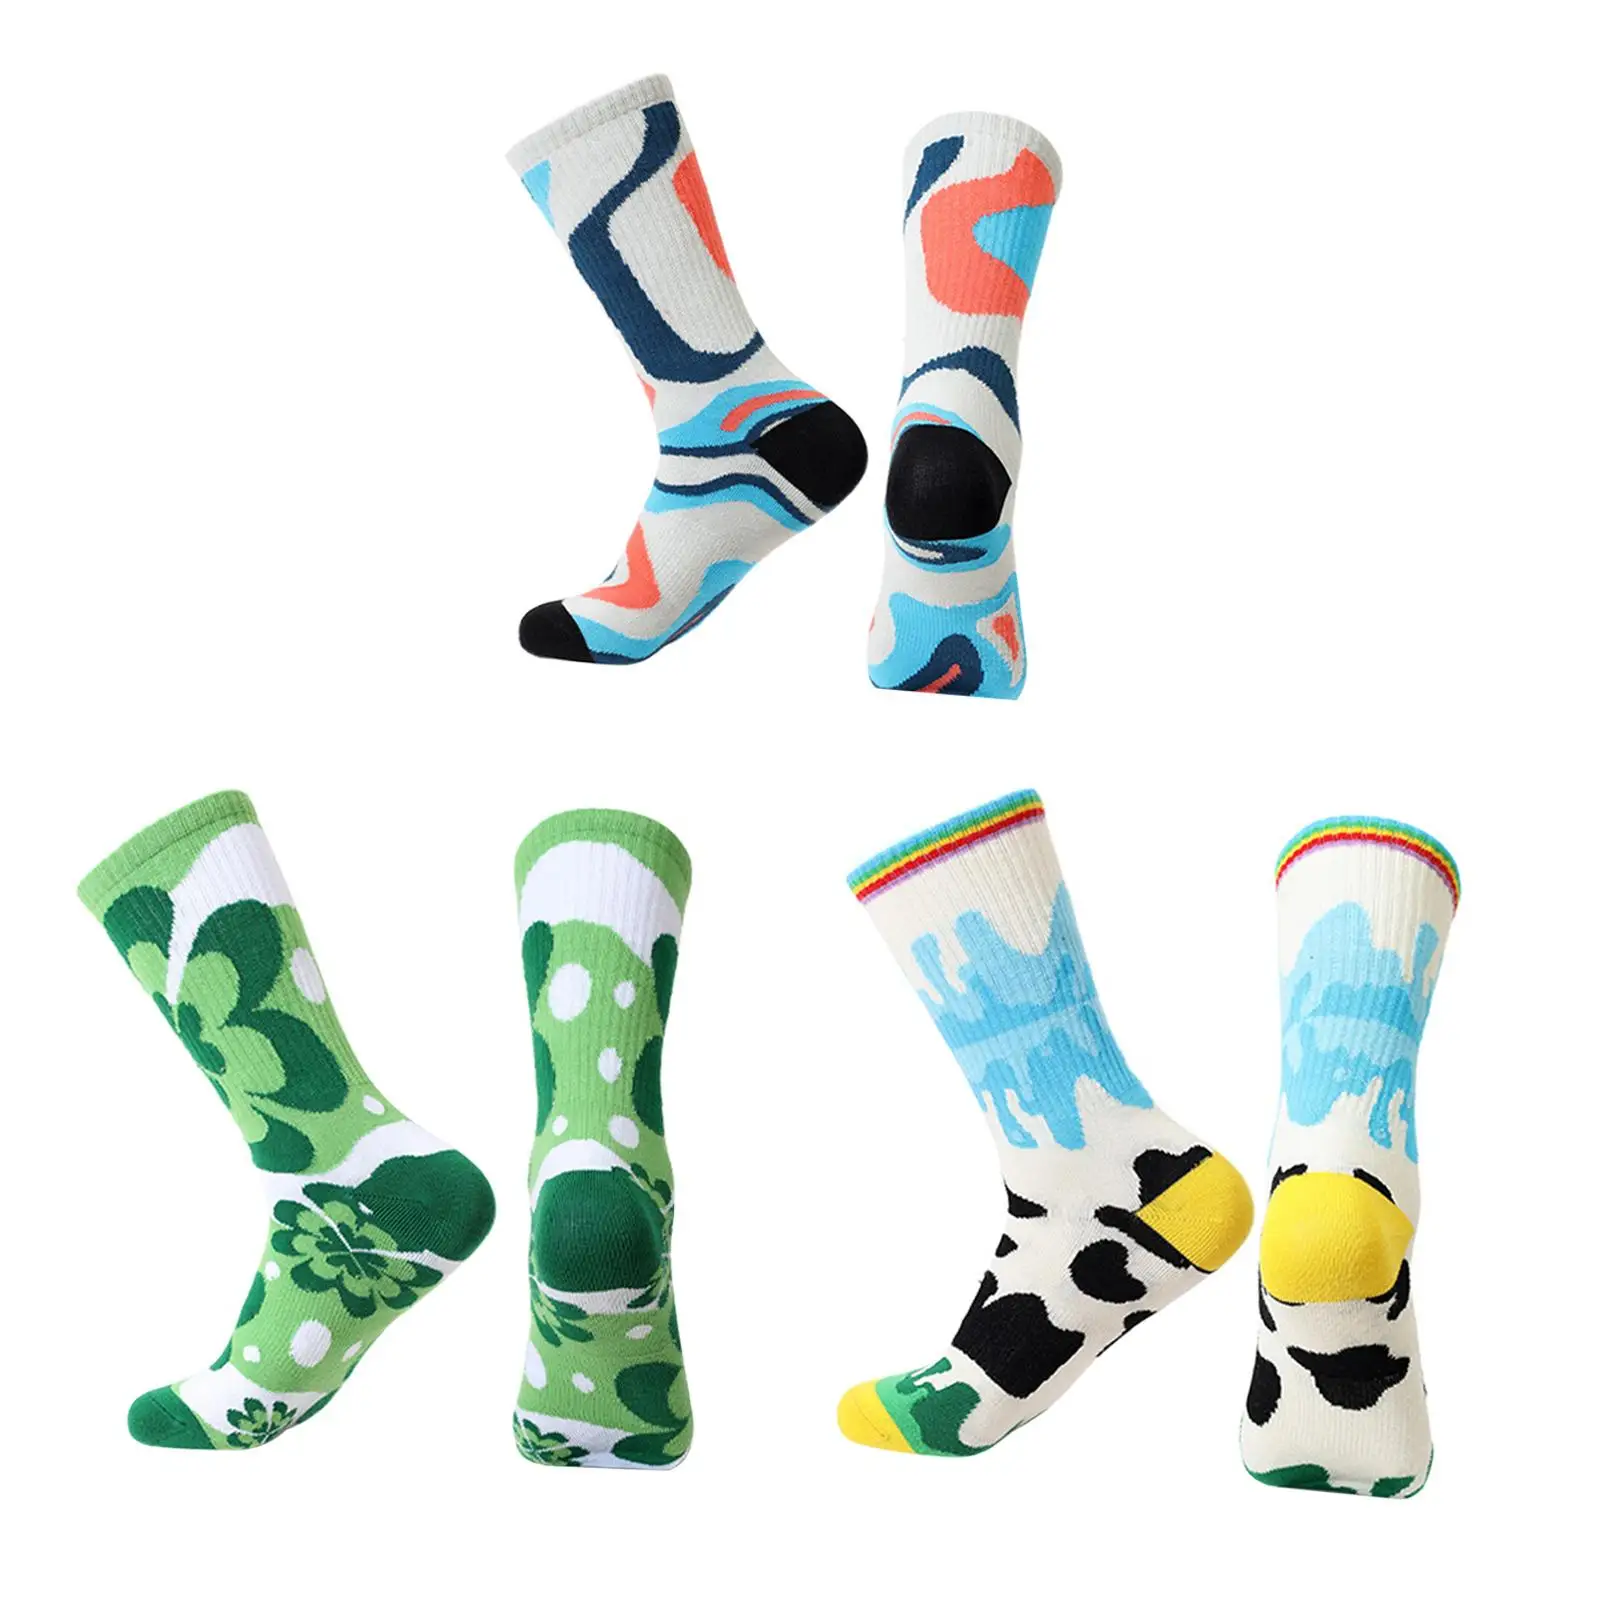 Men Women Colorful Patterned Crew Socks Combed Cotton Fashionable Cool Novelty Casual Crazy Sports Socks for Running Basketball